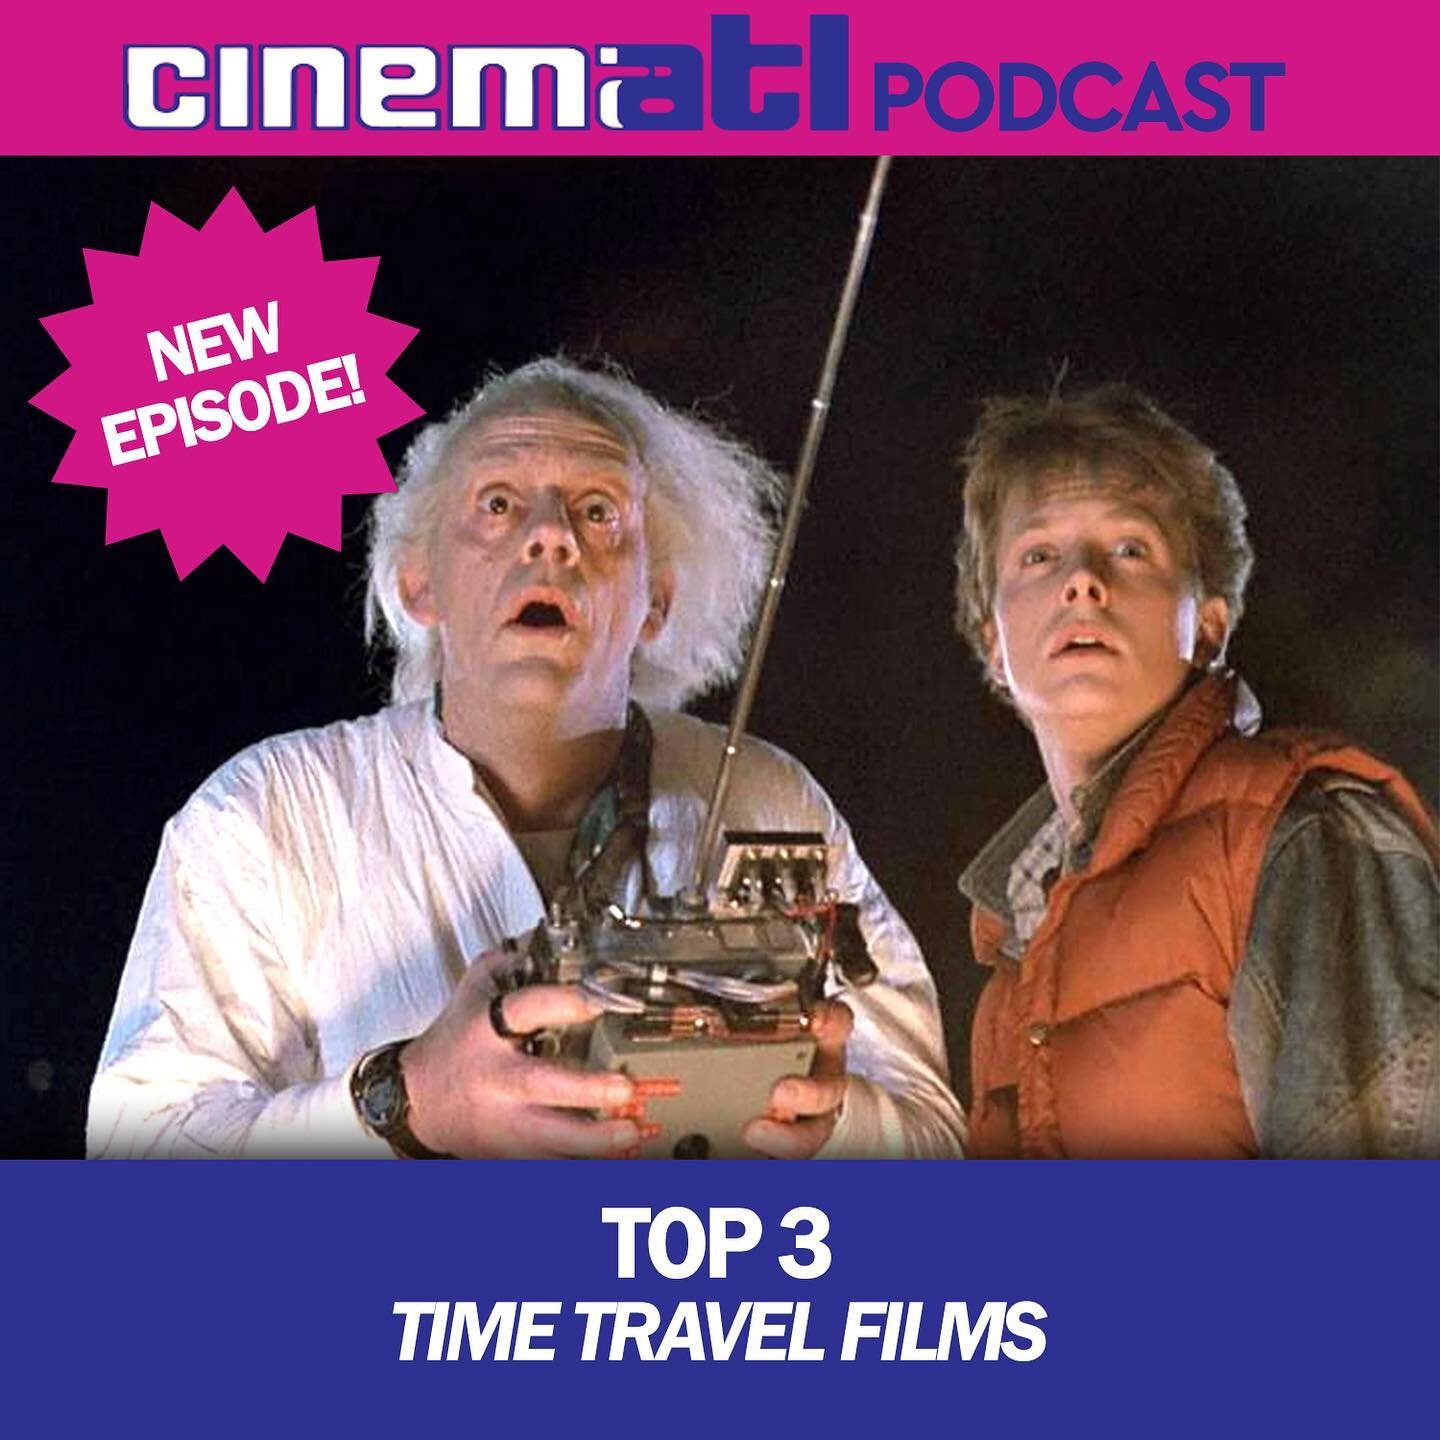 When Daylight Saving Time ends, we all become time travelers. Find out our picks for the best Time Travel Films in this week&rsquo;s #CinemATL #podcast. #Top3TimeTravel
🎧Listen links in bio! 🔗
.
.
.
#filmpodcast #moviepodcast #timetravelmovies #top